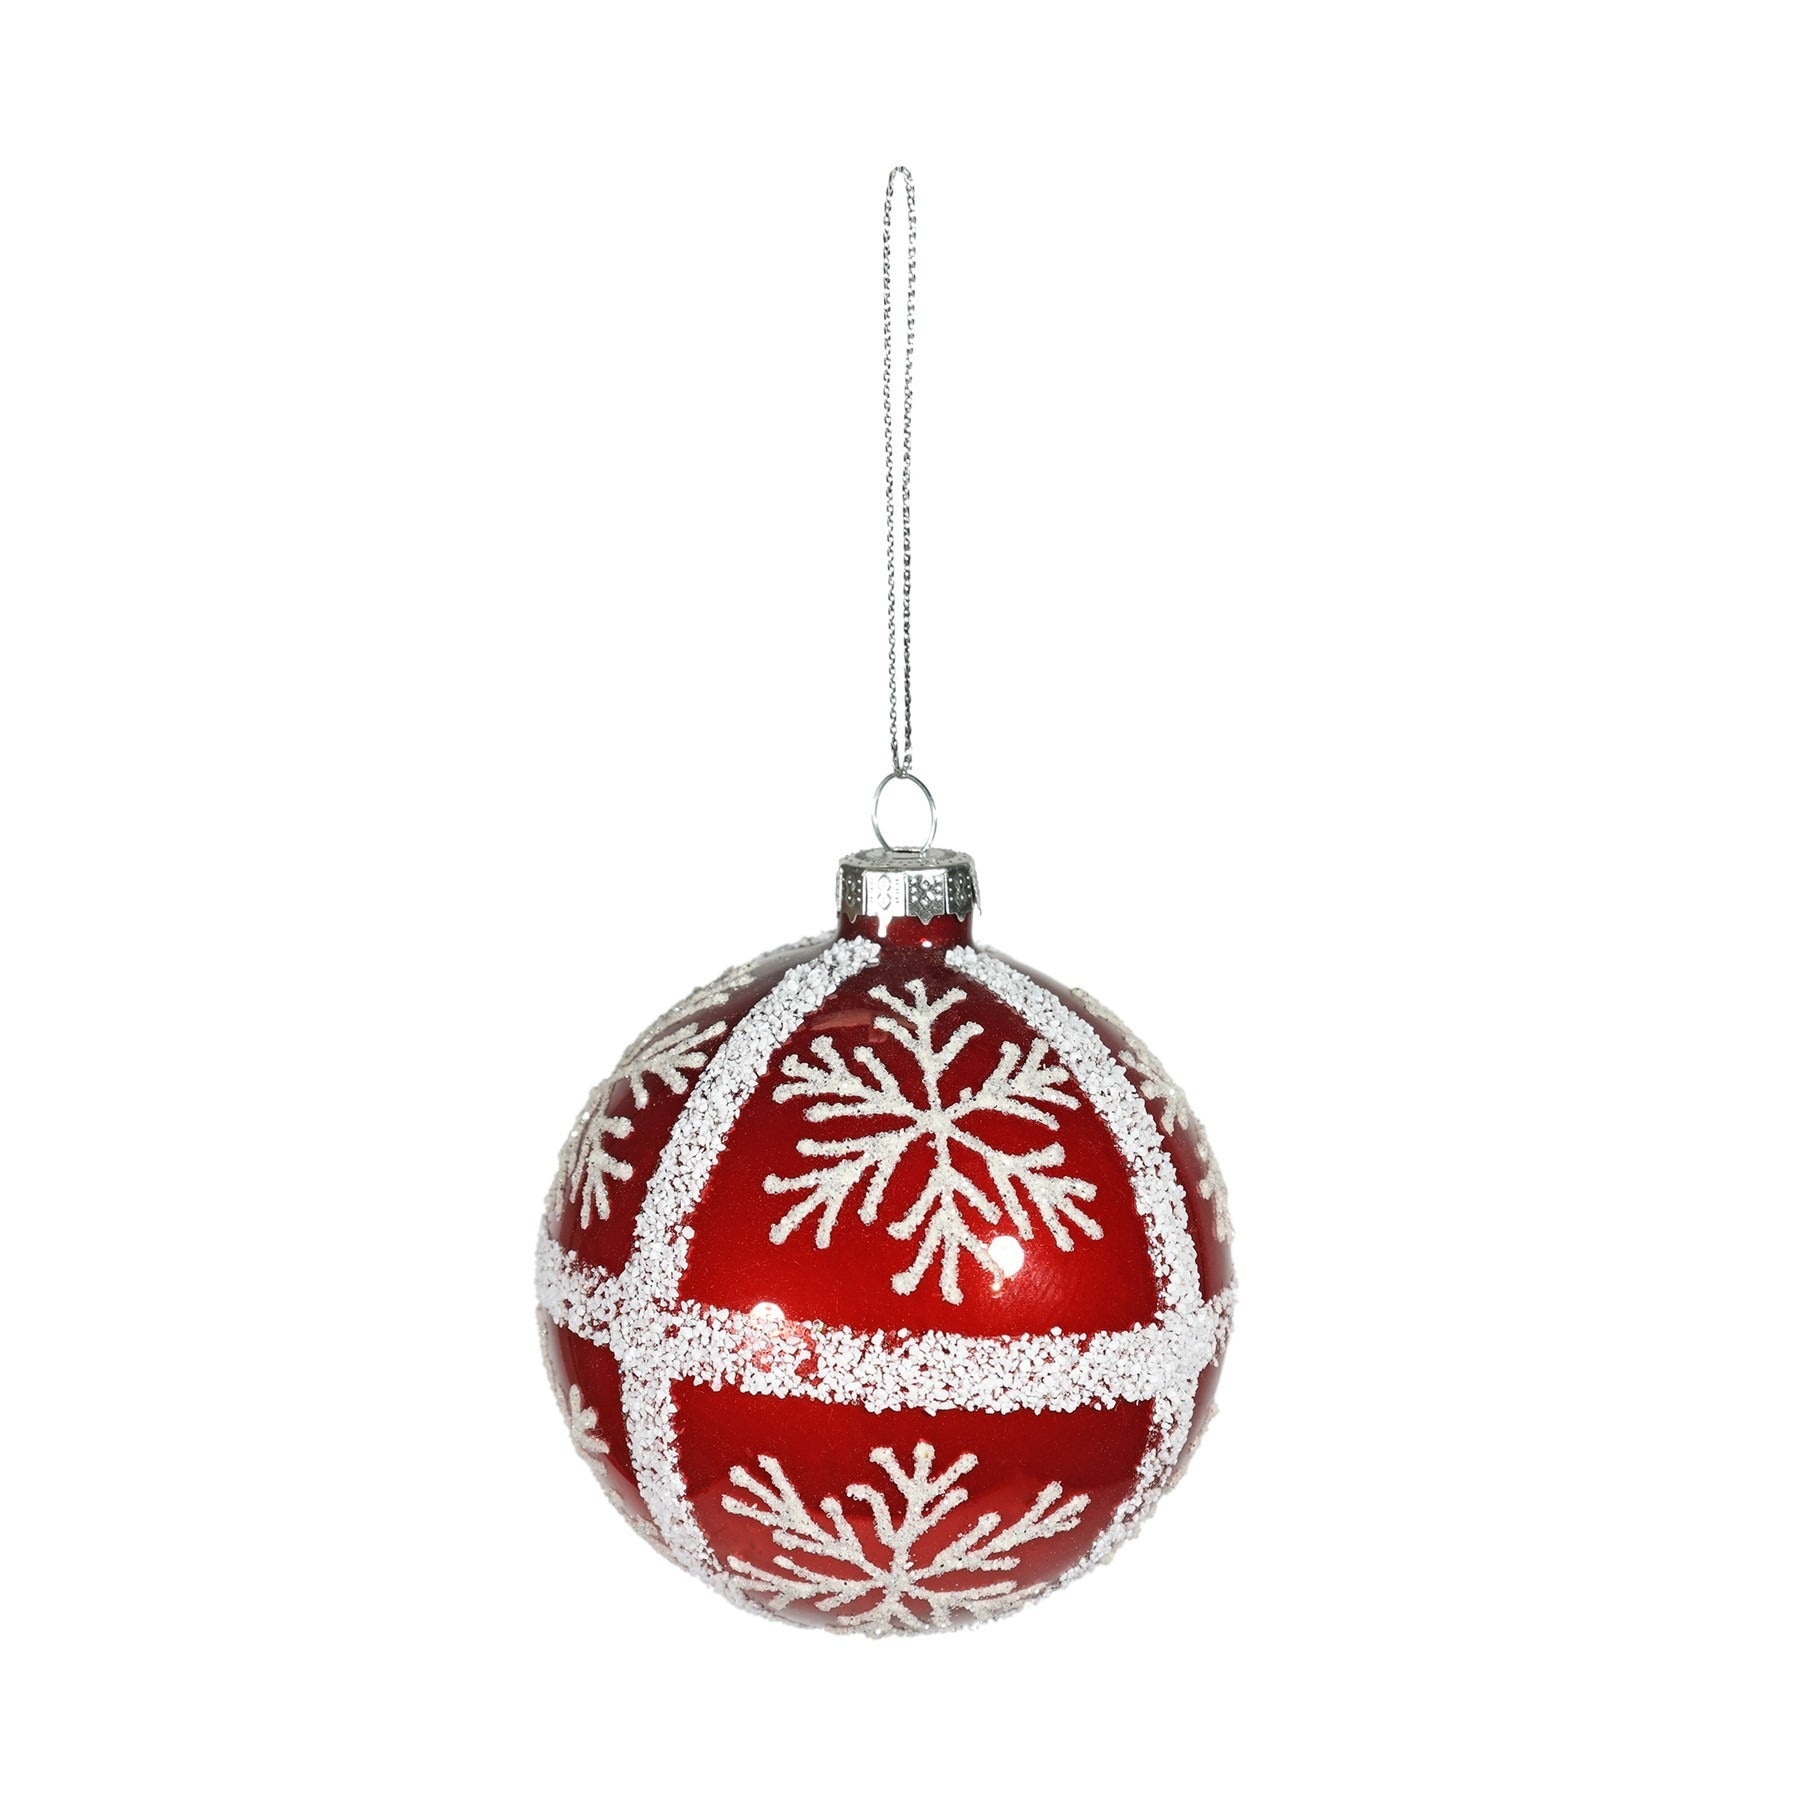 View Red Glass Bauble with White Glitter Snowflakes Dia8cm information